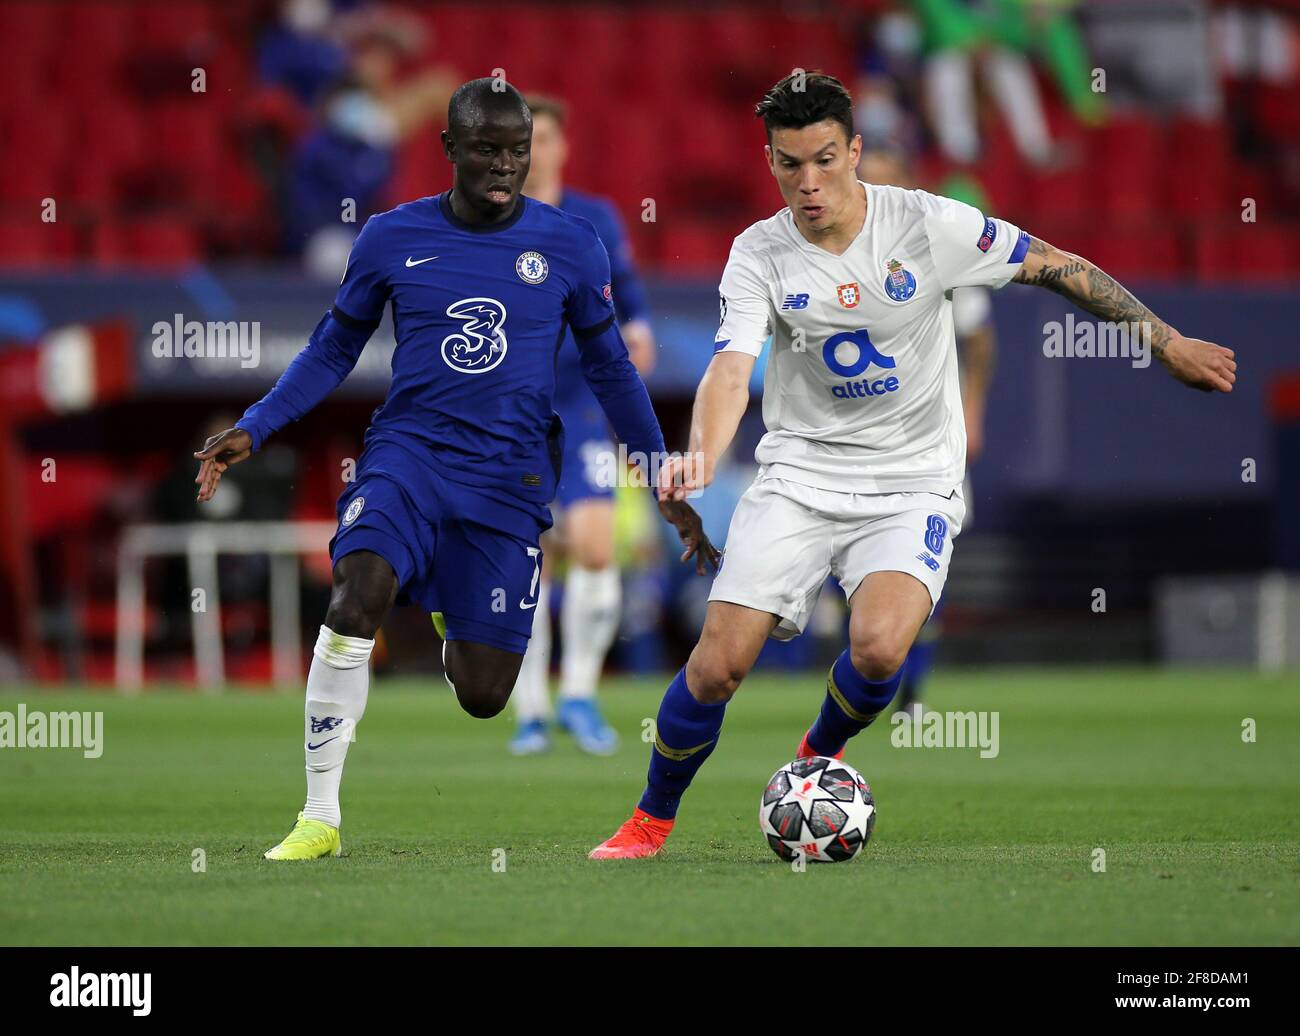 Chelsea's N'Golo Kante (left) and FC Porto's Mateus Uribe battle for the ball during the UEFA Champions League match at the Ramon Sanchez-Pizjuan Stadium, Seville. Picture date: Tuesday April 13, 2021. See PA story SOCCER Chelsea. Photo credit should read: Isabel Infantes/PA Wire. RESTRICTIONS: Editorial use only, no commercial use without prior consent from rights holder. Stock Photo